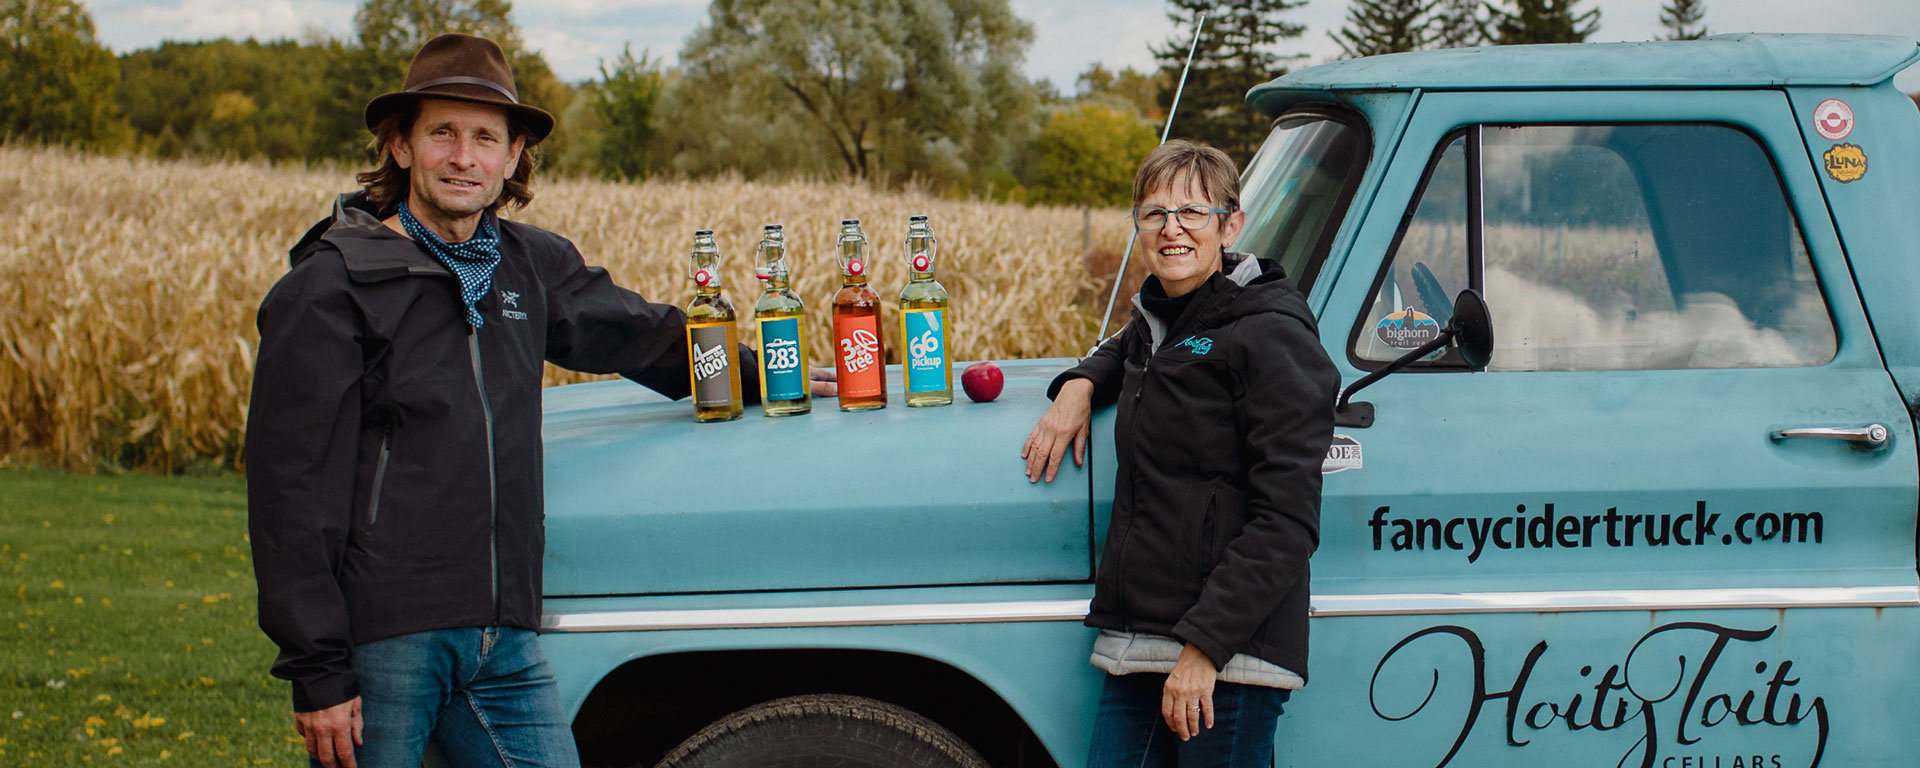 two people leaning against a retro blue truck with ciders on the hood of the truck